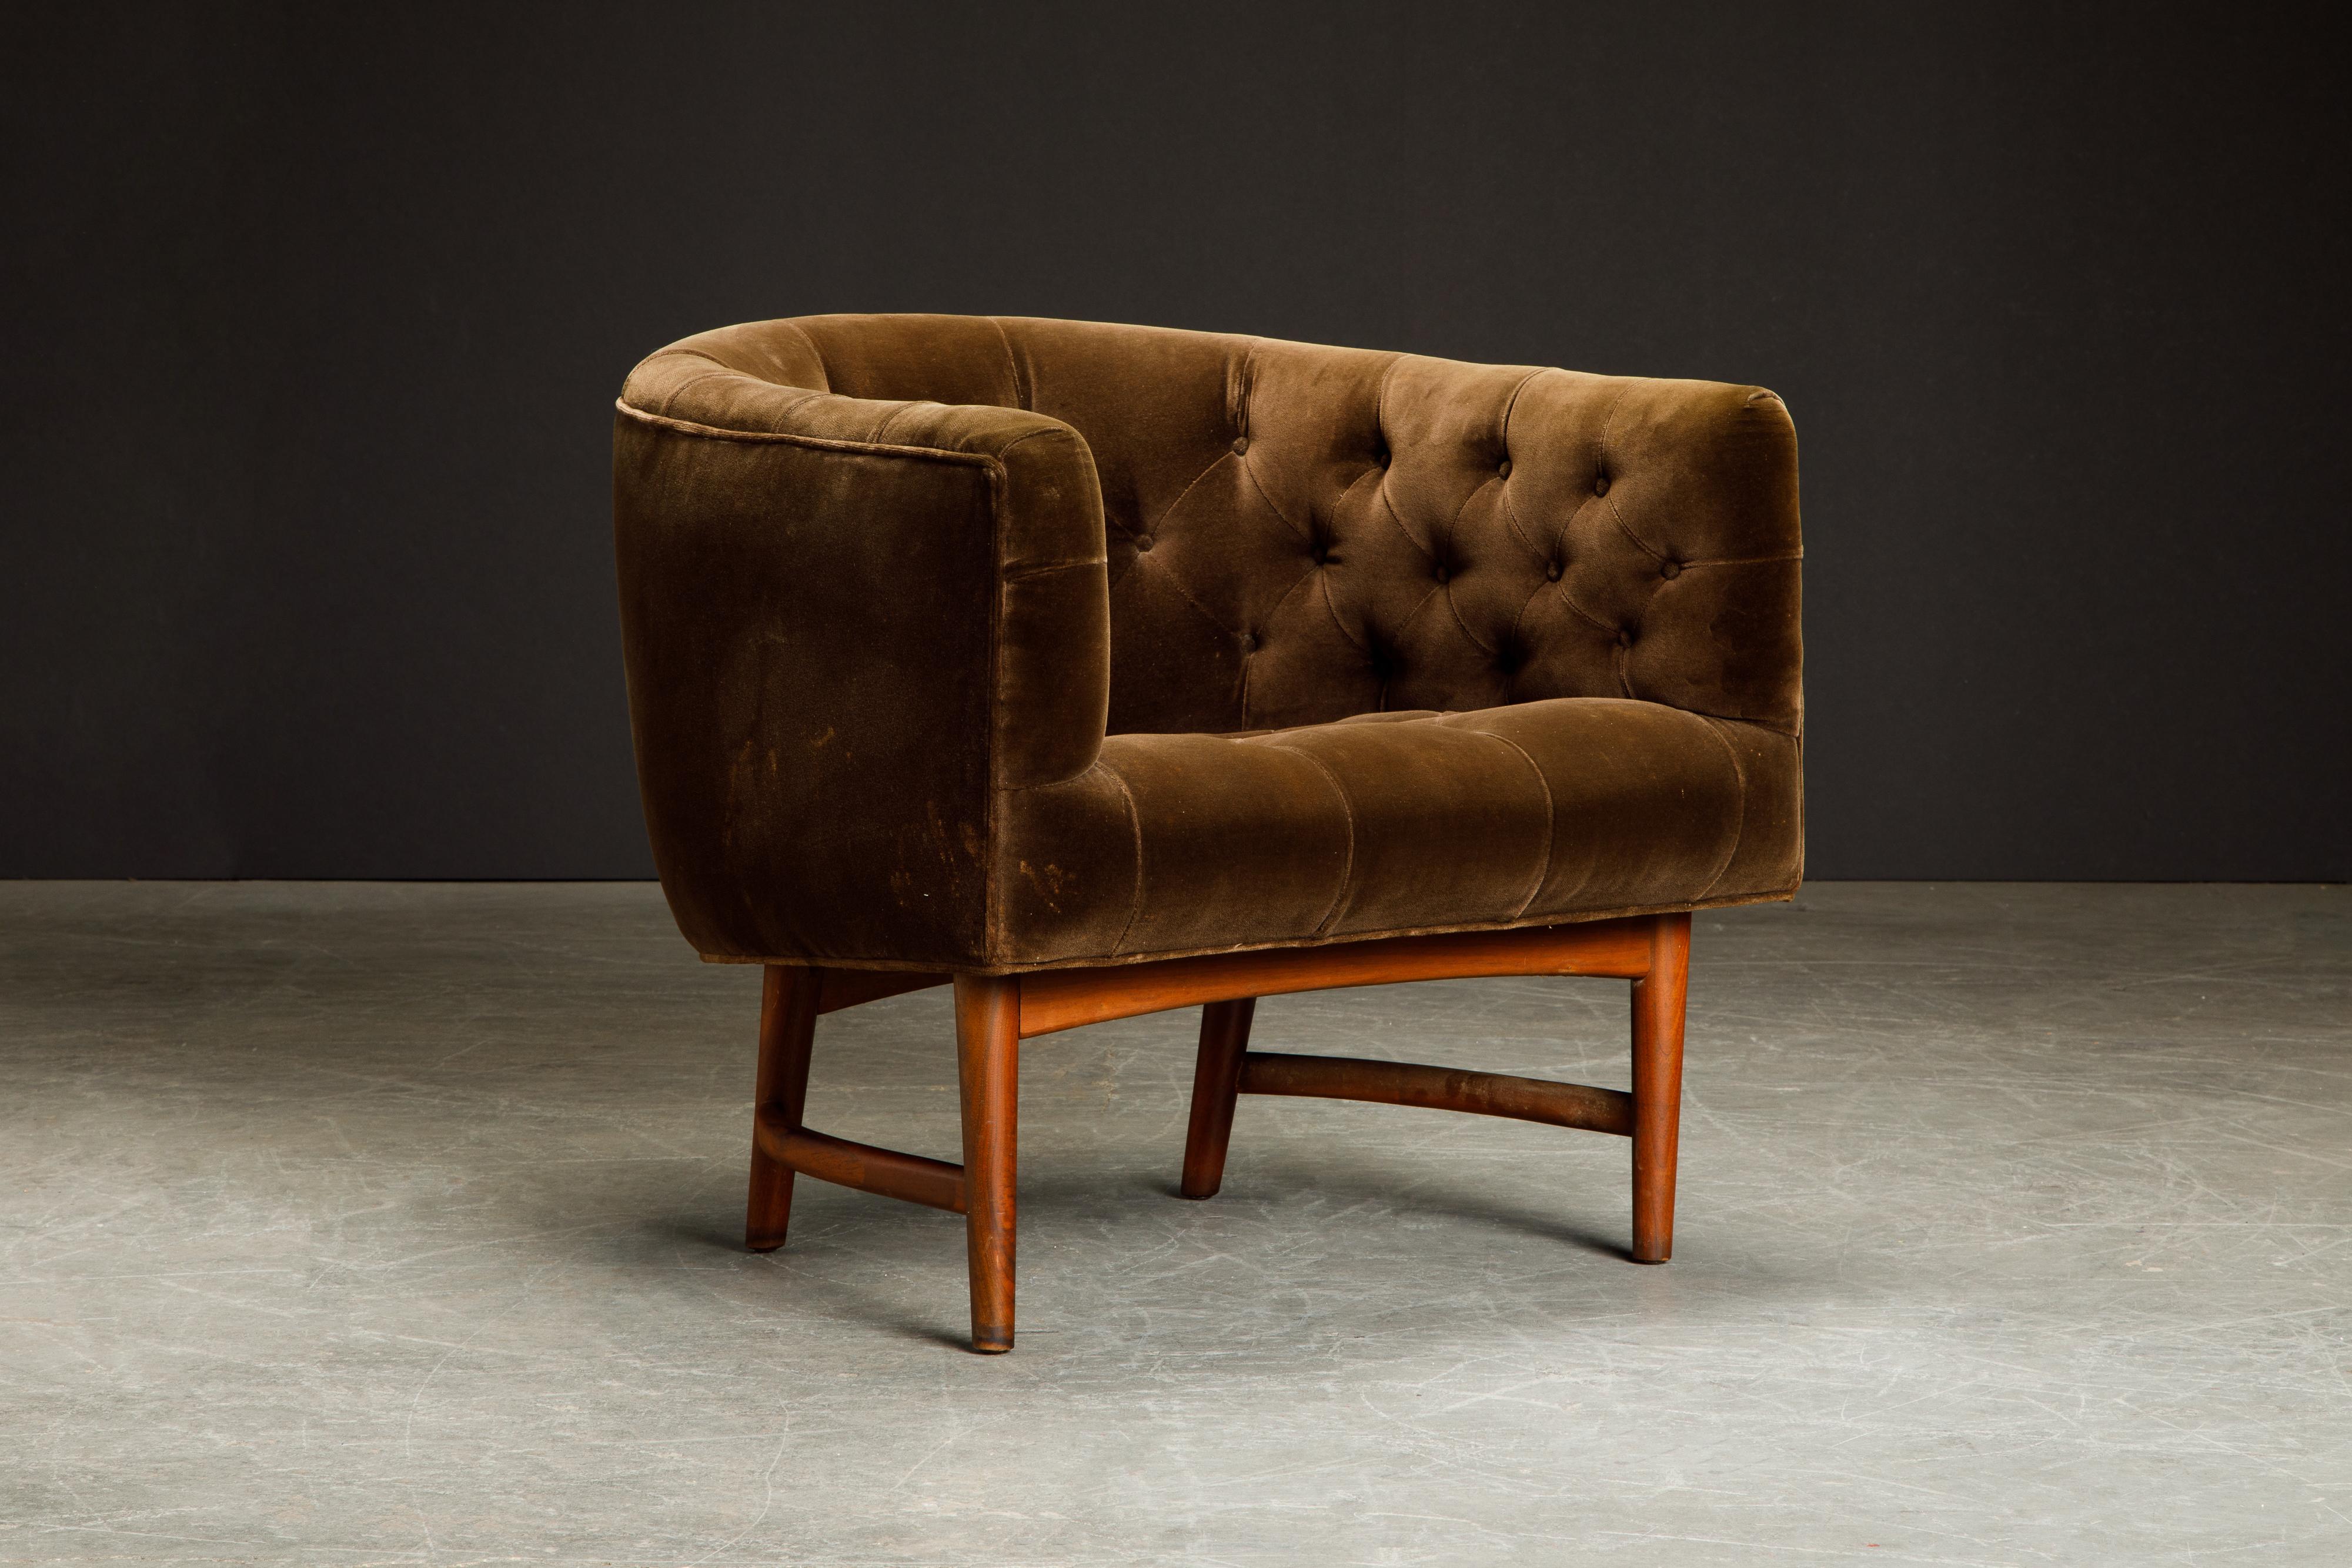 This is the original 'Betty' tufted velvet barrel chair by Milo Baughman for Thayer Coggin, signed and dated 1968. The gorgeous vintage tufted brown soft and comfy velvet upholstery which floats on top of a curvaceous walnut frame. This modernist